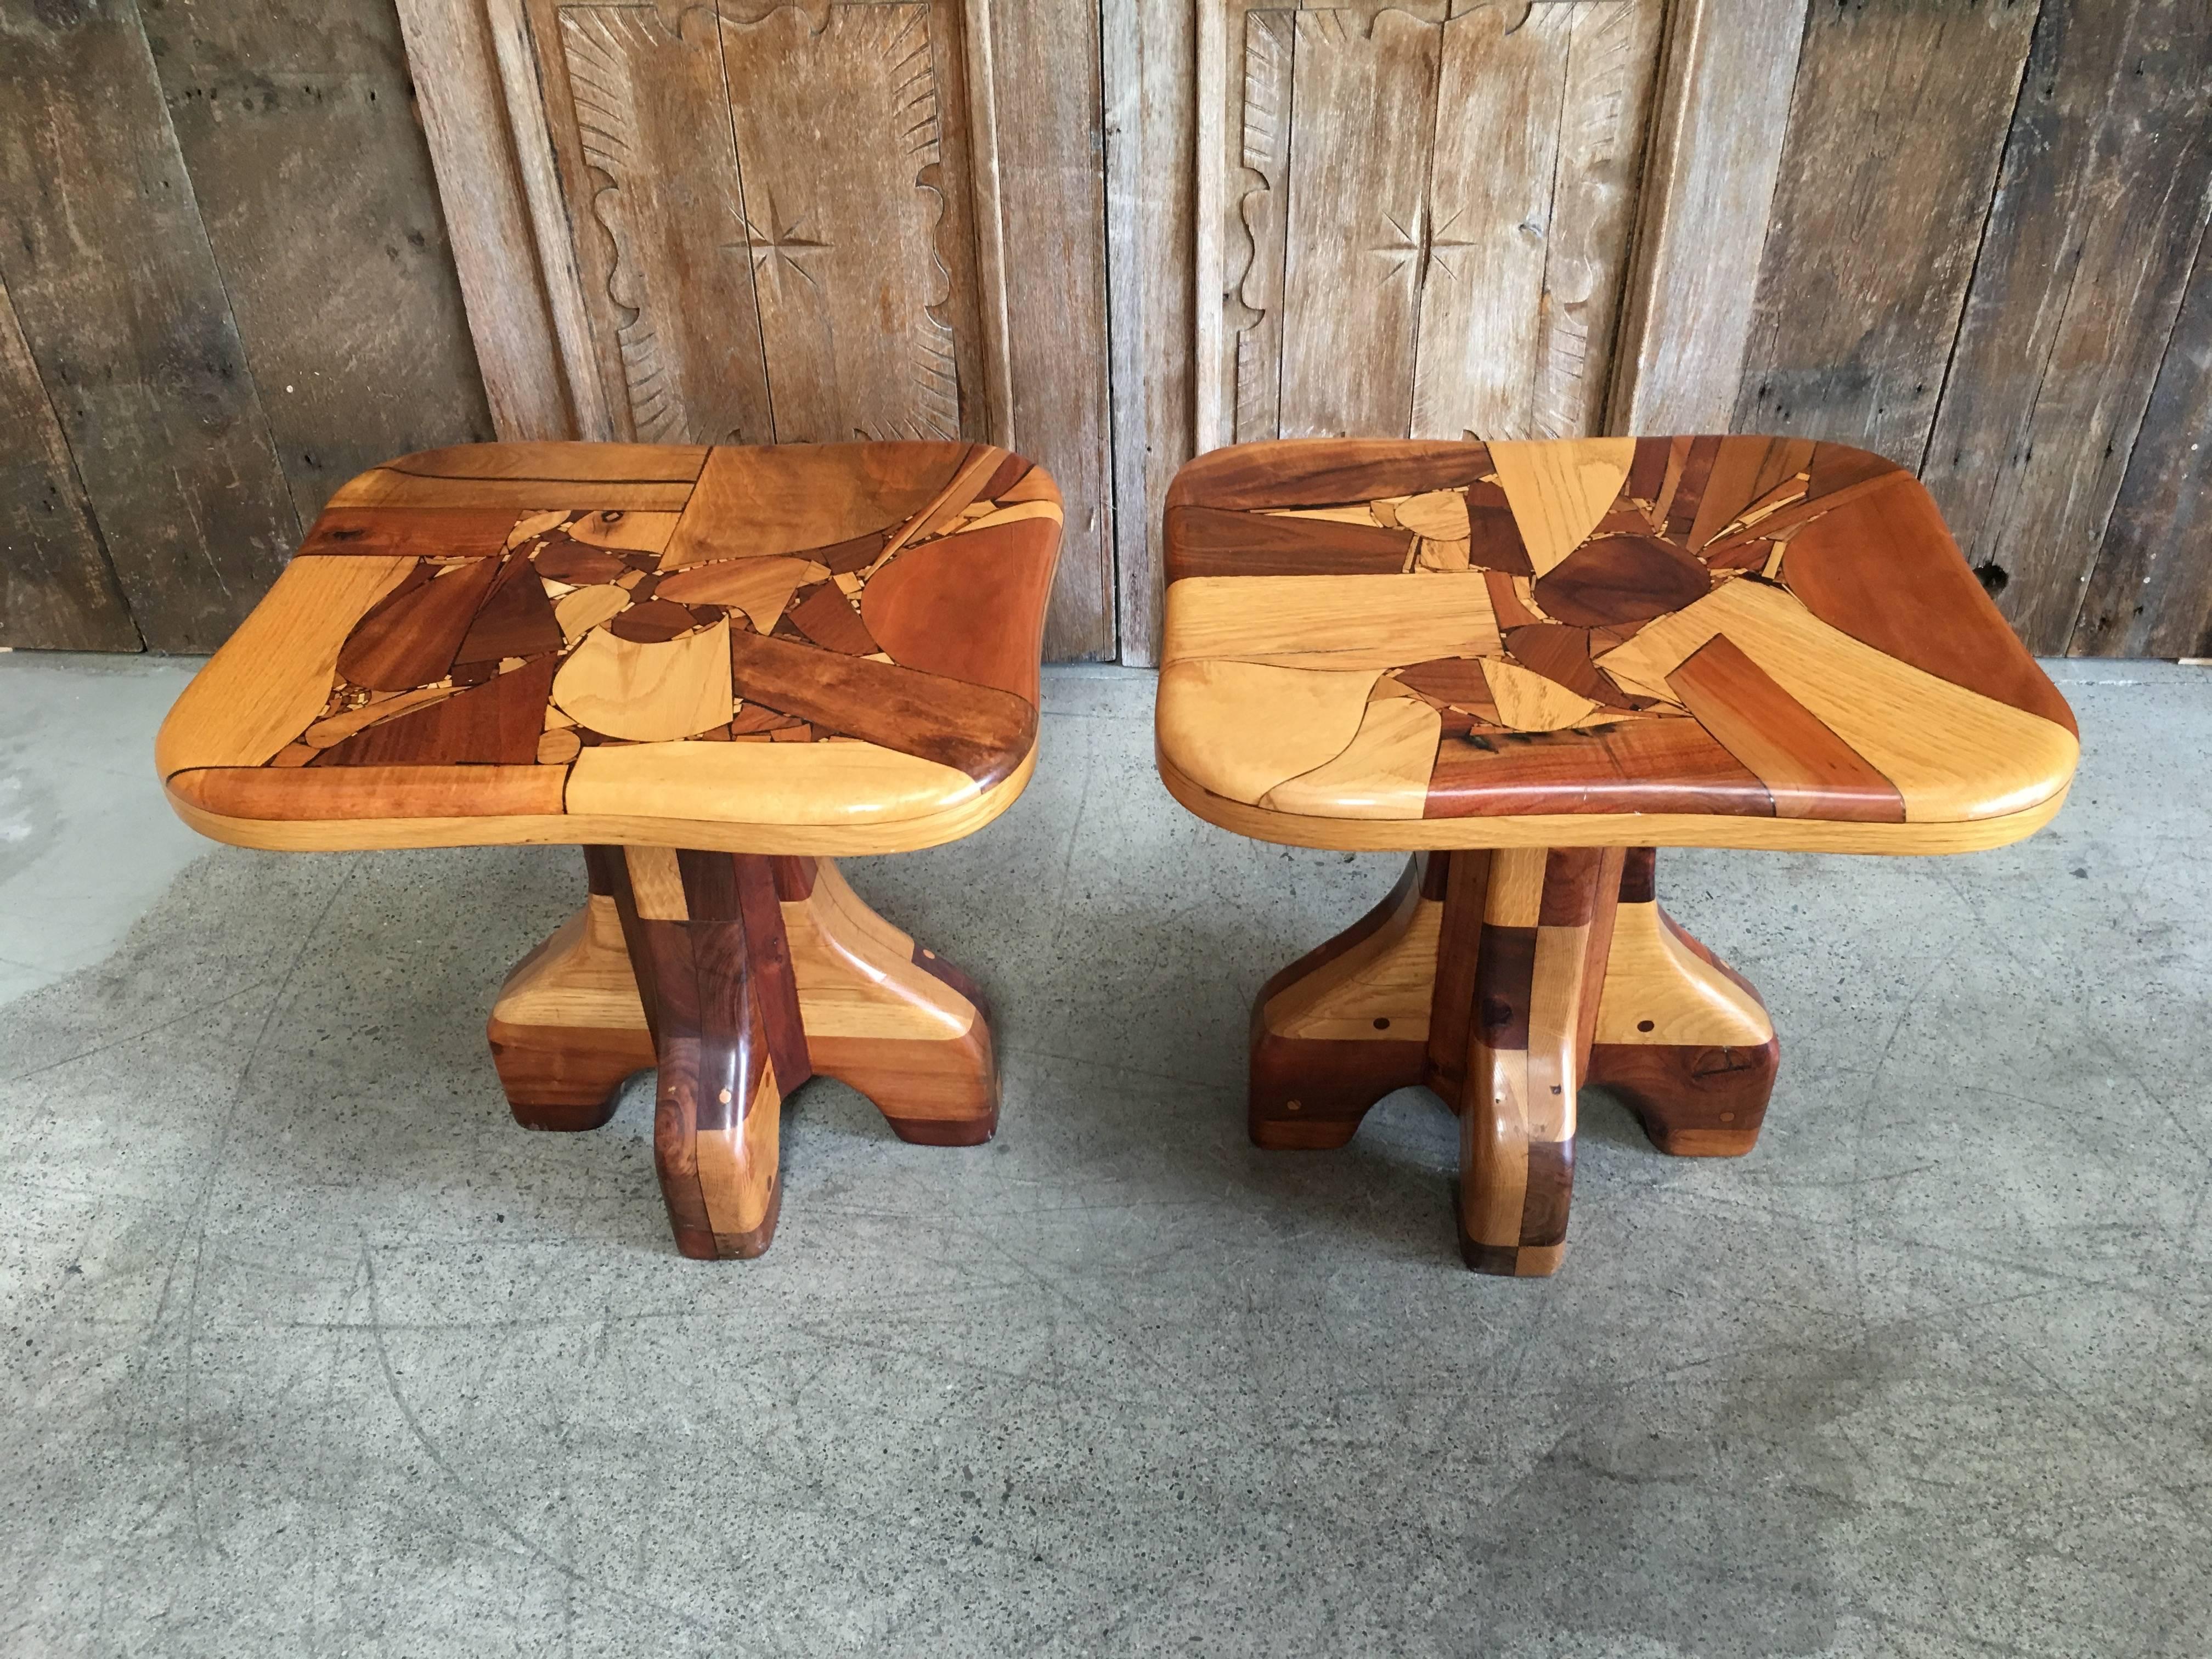 Solid wood marquetry end tables in the abstract style with a combination of woods.